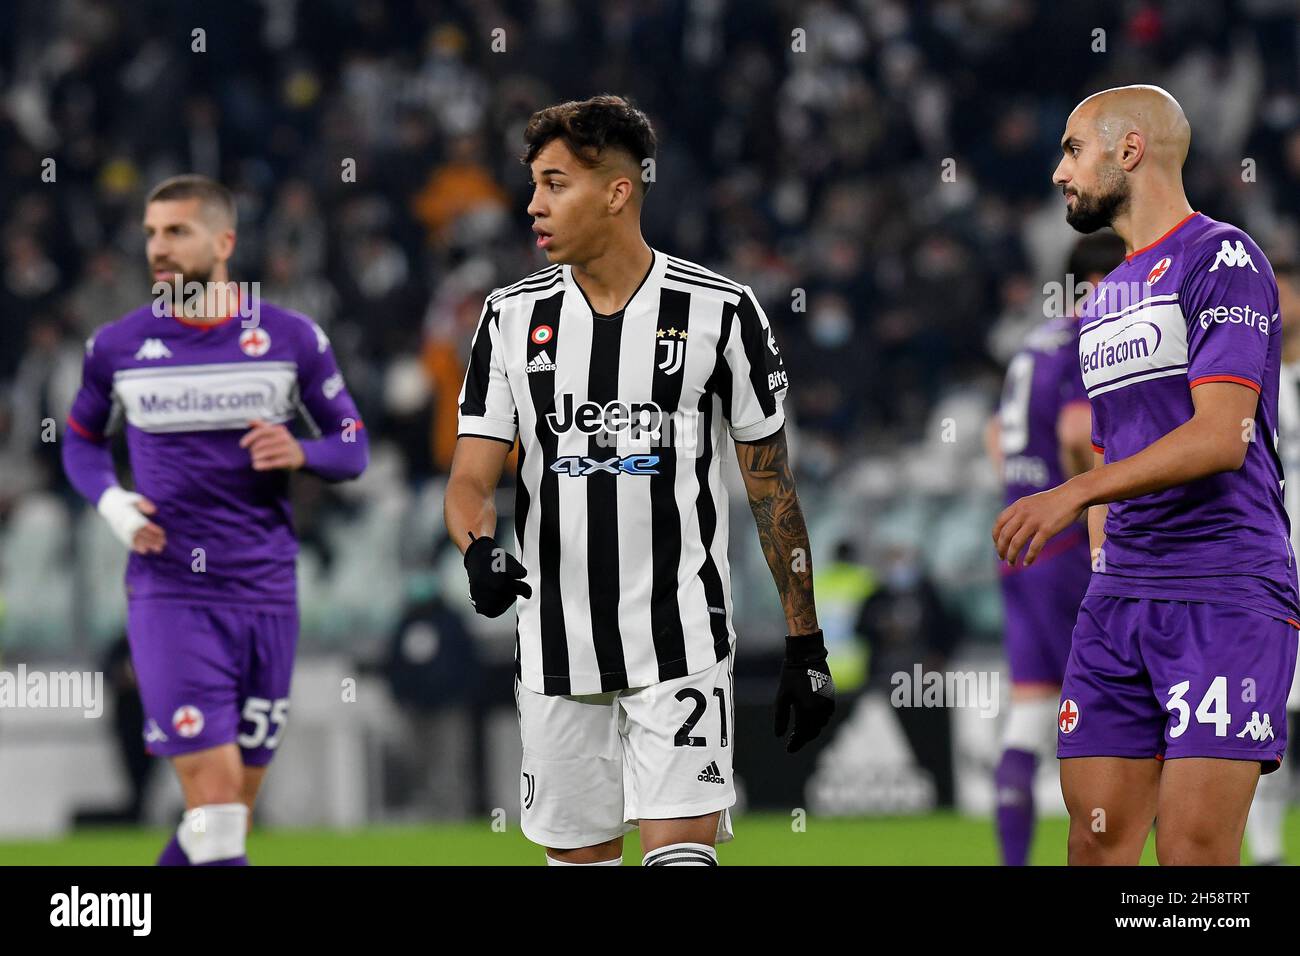 Turin, Italy. 06th Nov, 2021. Kaio Jorge of Juventus FC in action during the Serie A 2020/21 match between Juventus FC and ACF Fiorentina at Allianz Stadium on November 06, 2021 in Turin, Italy Photo ReporterTorino Credit: Independent Photo Agency/Alamy Live News Stock Photo